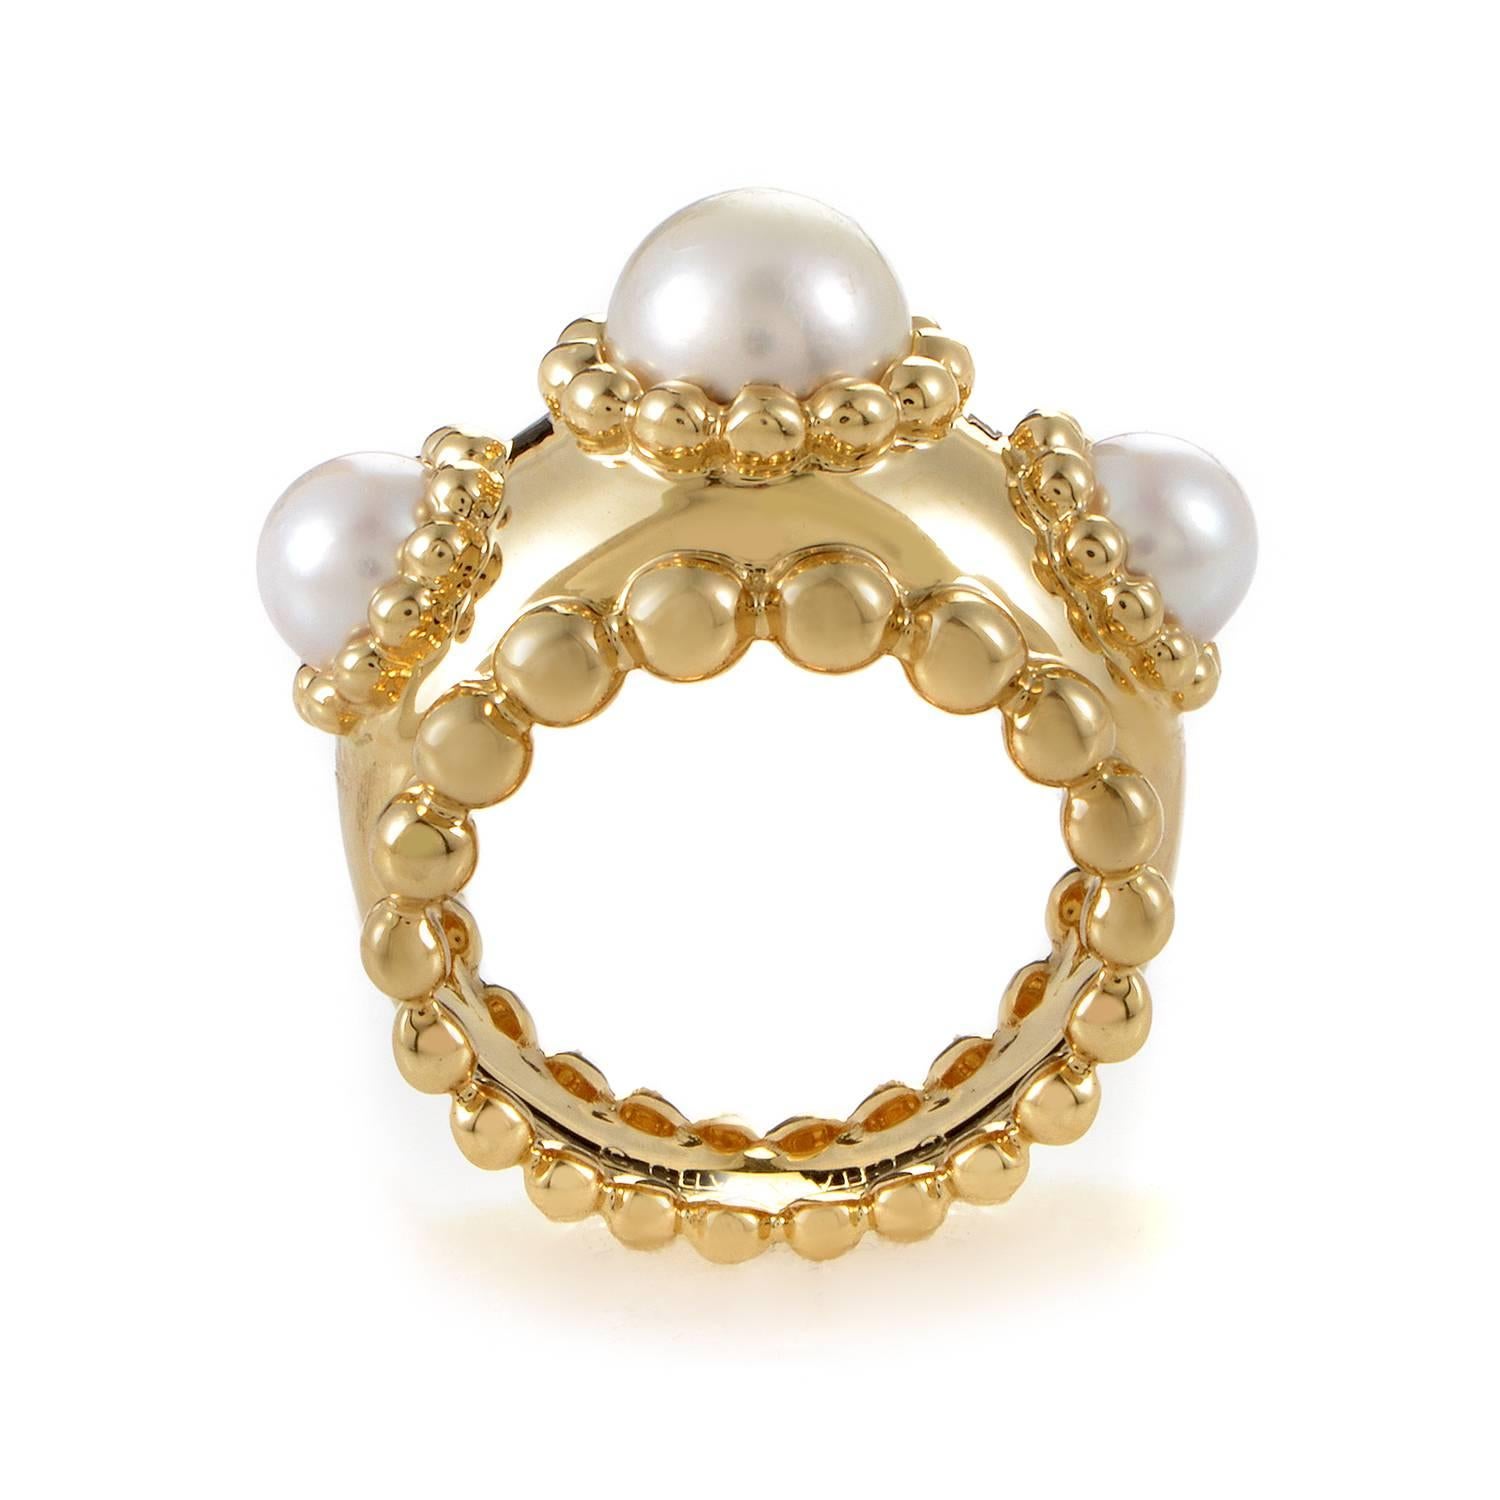 The oceanic majesty of pearls is the theme running through this luxuriously bold ring design from Chanel. It begins with the 18K yellow gold band which ascends between gathering rows of monuments to the pearl, their symmetry perfectly forged off the